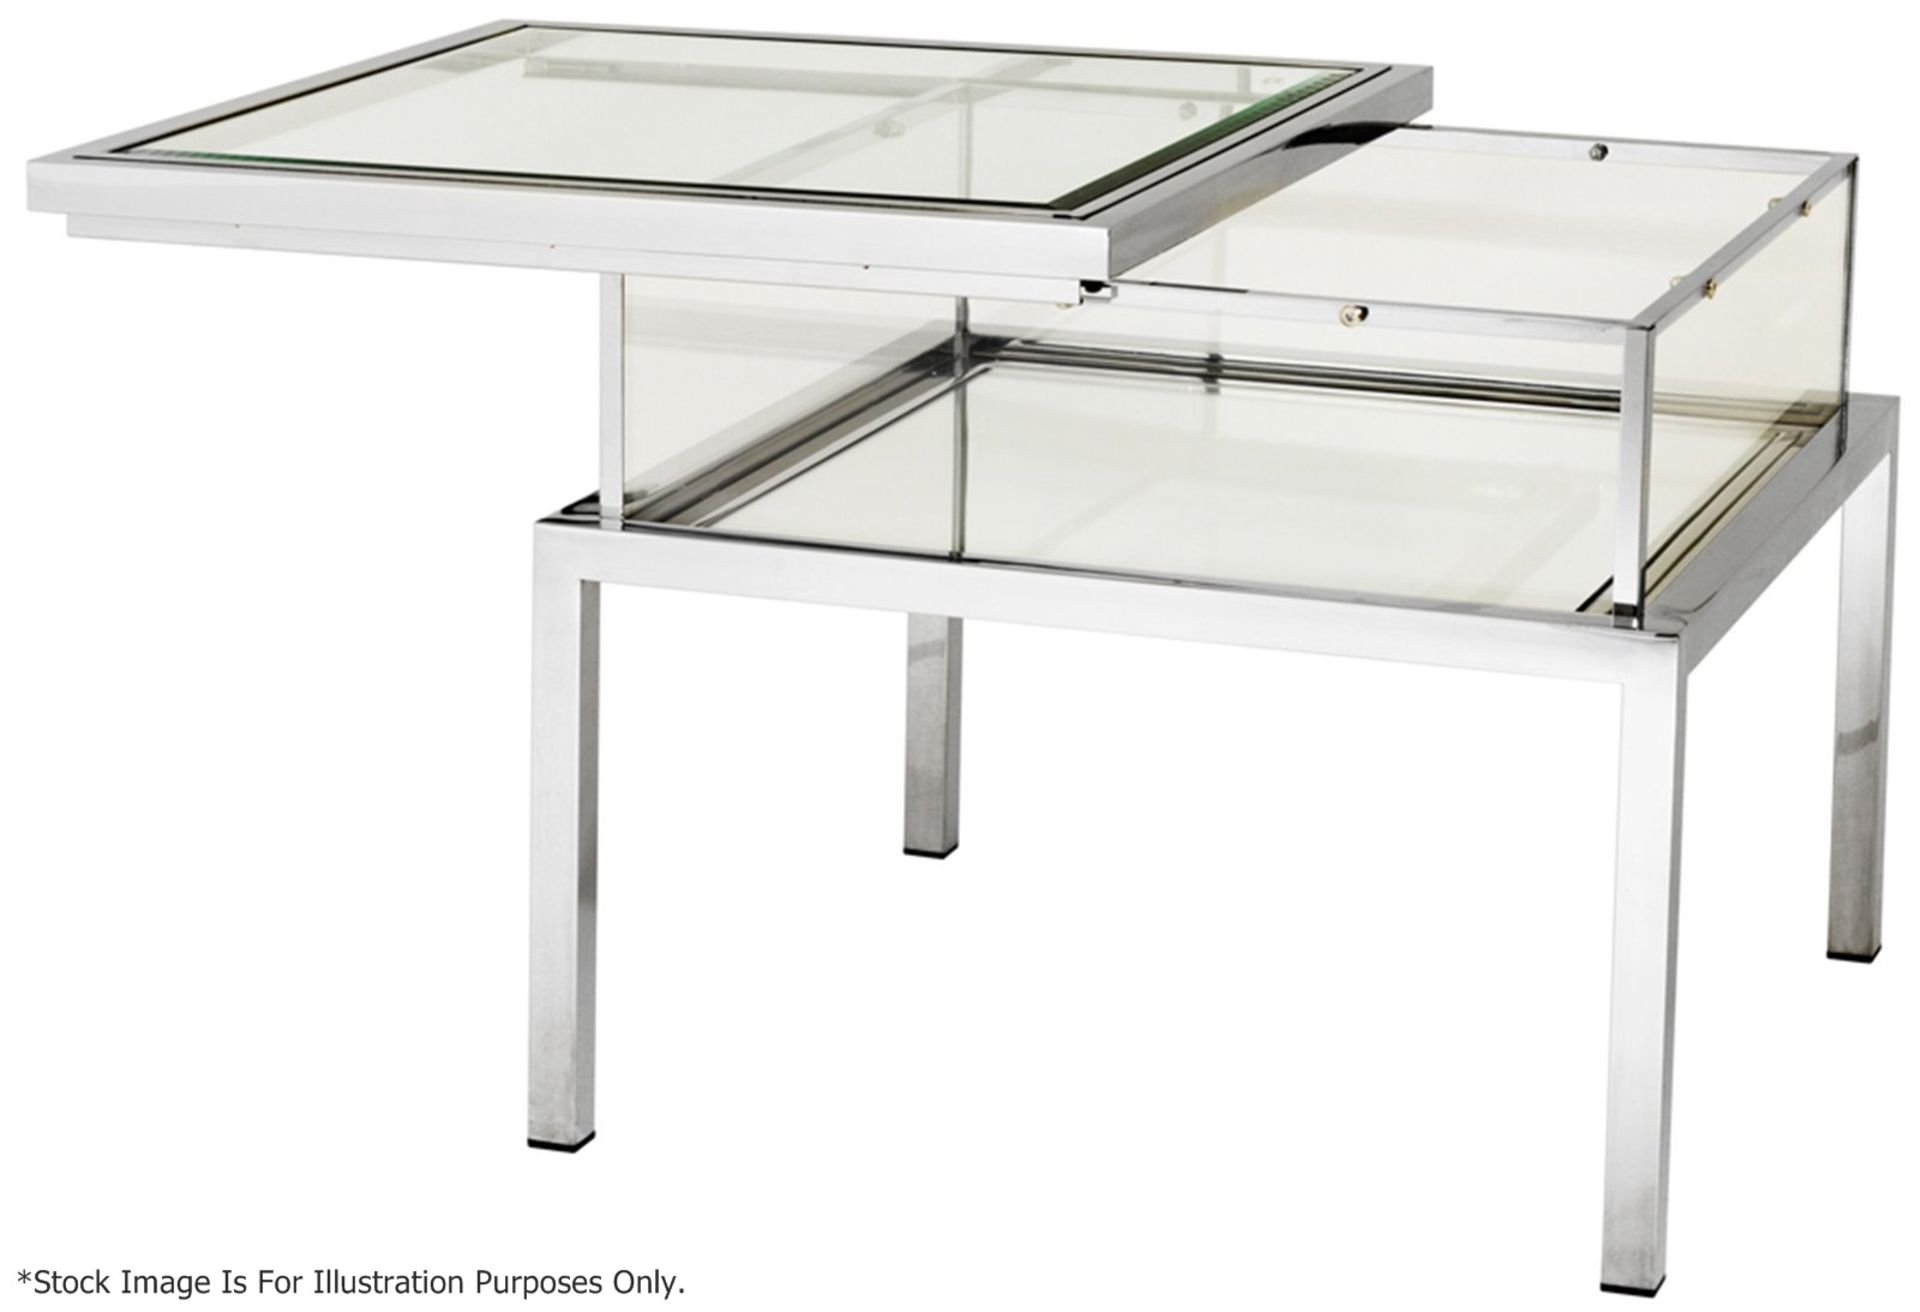 1 x EICHHOLTZ Glass Topped Side Table Harvey With A Polished Steel Frame - Original RRP £1,690